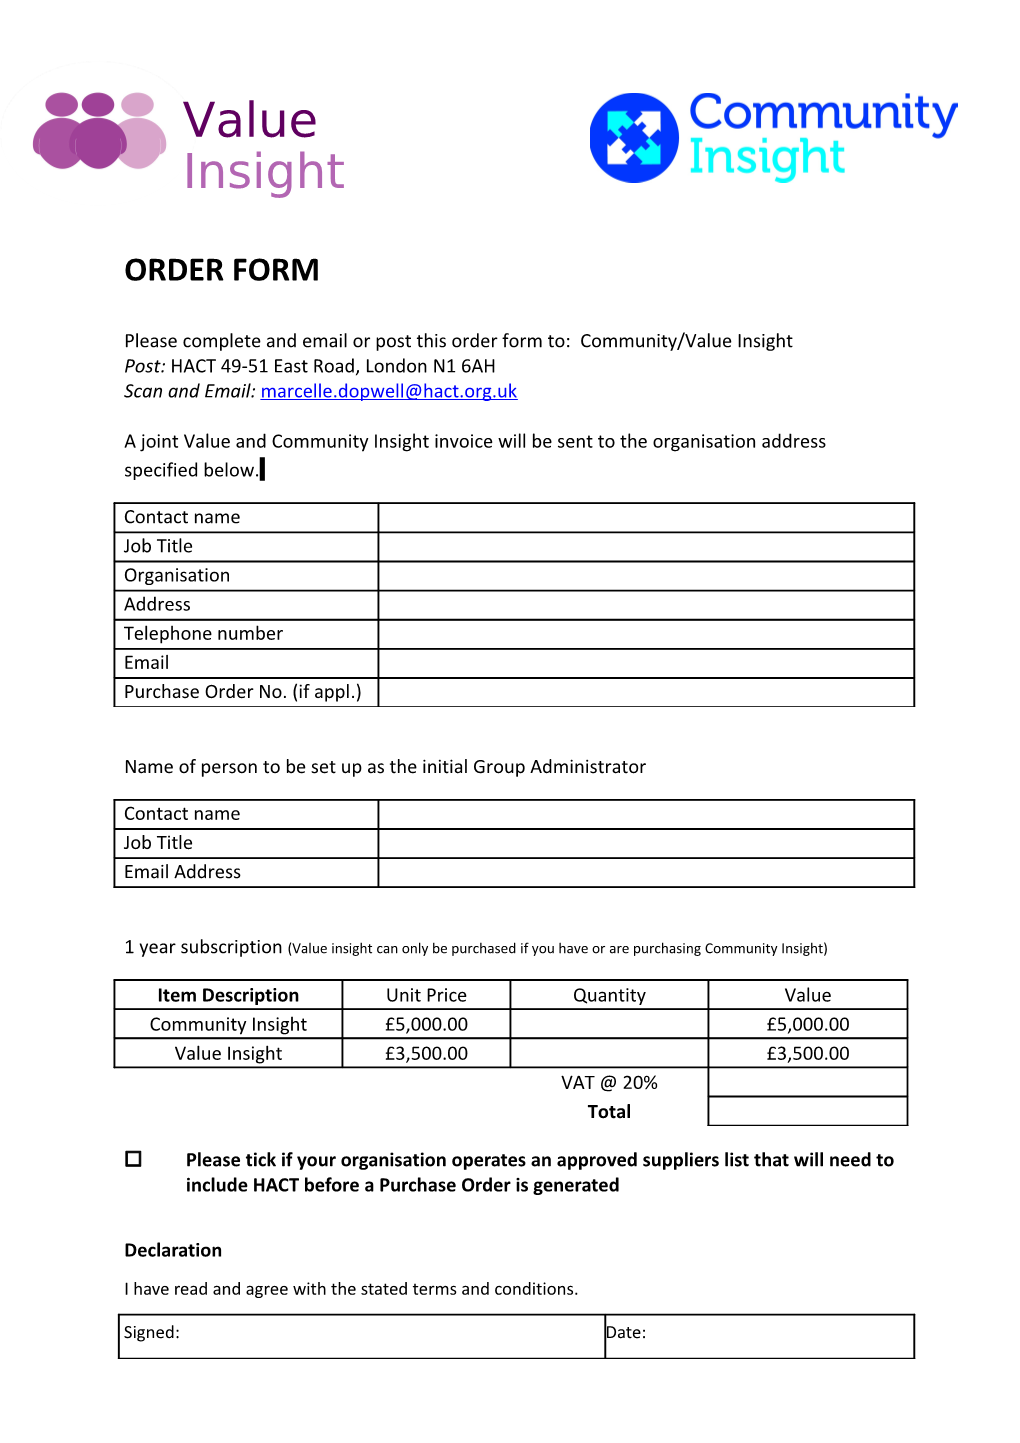 Please Complete and Email Or Post This Order Form To: Community/Value Insight